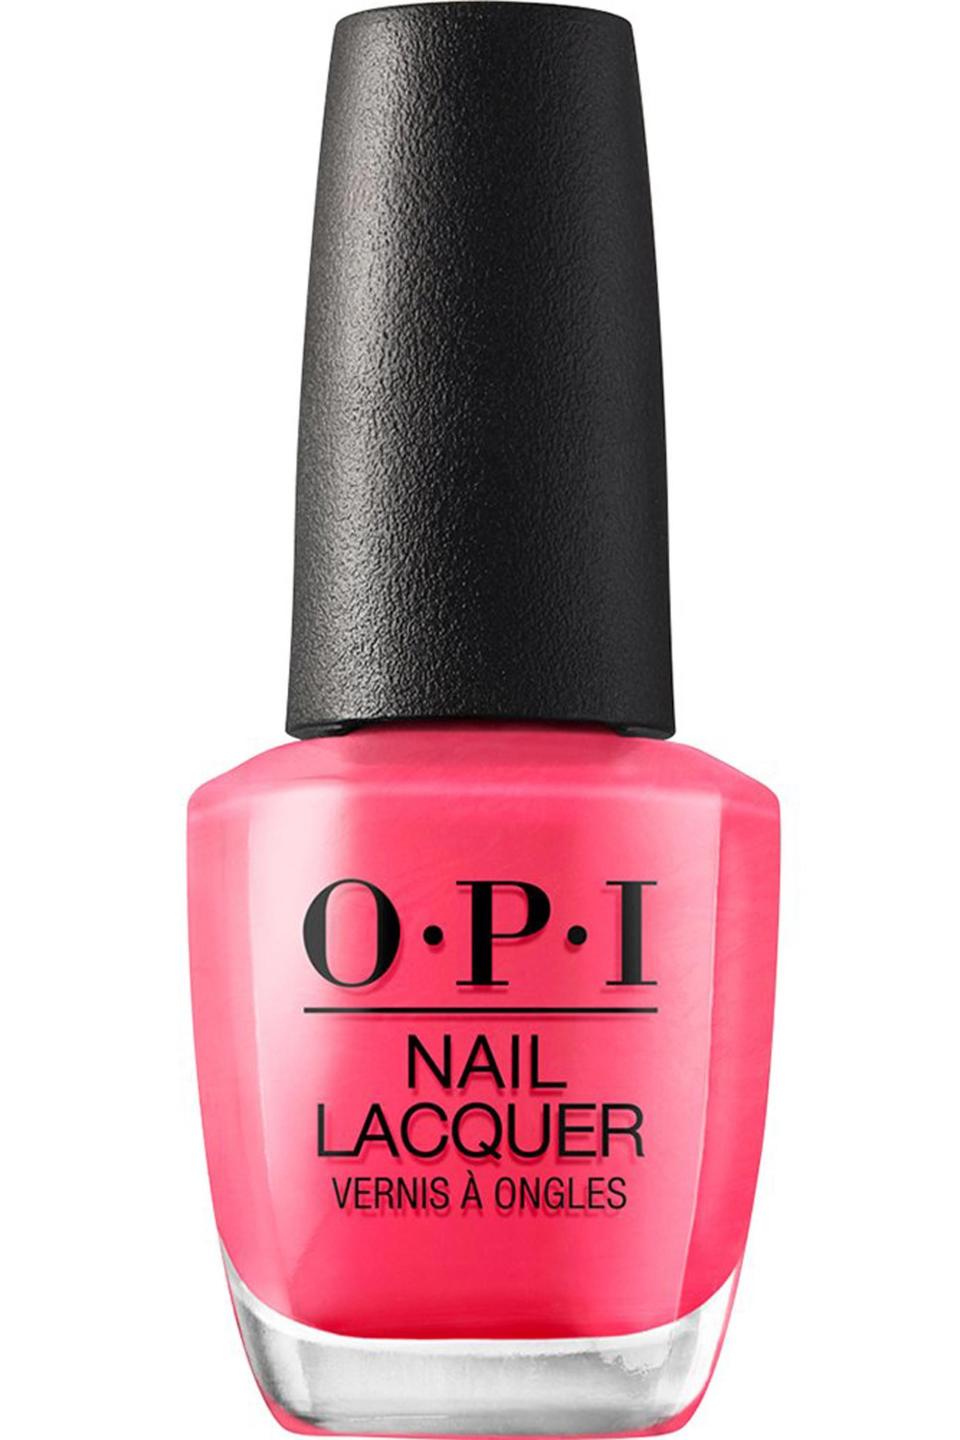 25) OPI Nail Lacquer in Strawberry Margarita